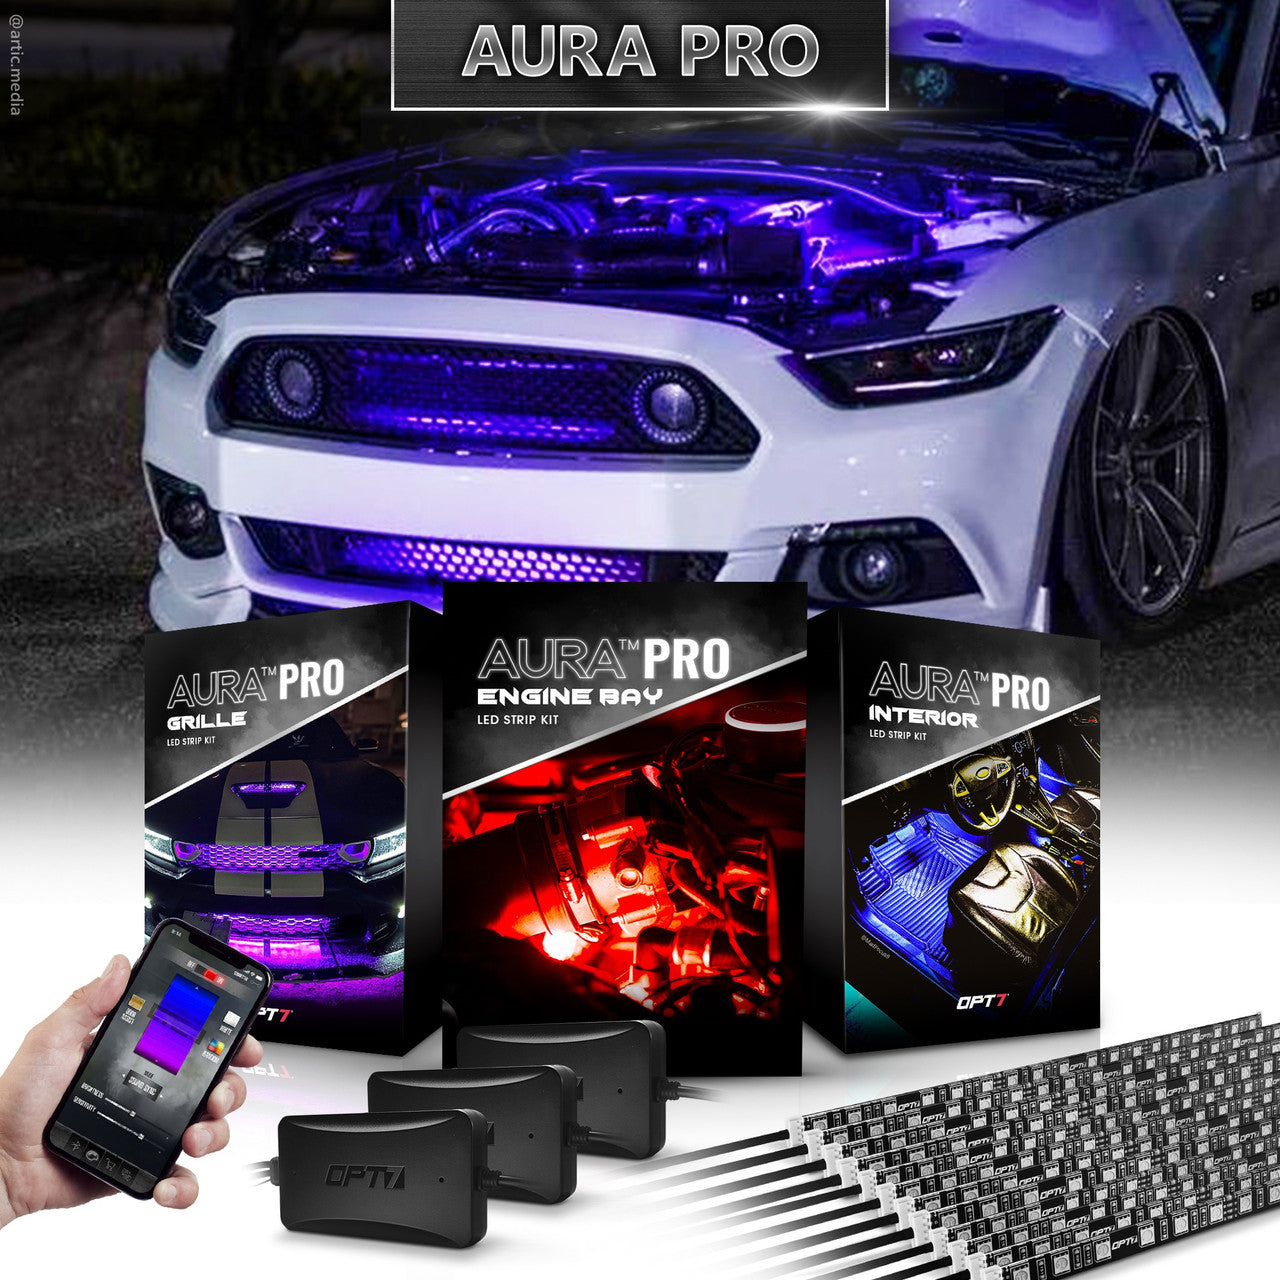 Opt7 Aura Engine Bay + Interior + Grille Bundle Package Sales Aura Pro Bluetooth Controlled (iOS & Android)